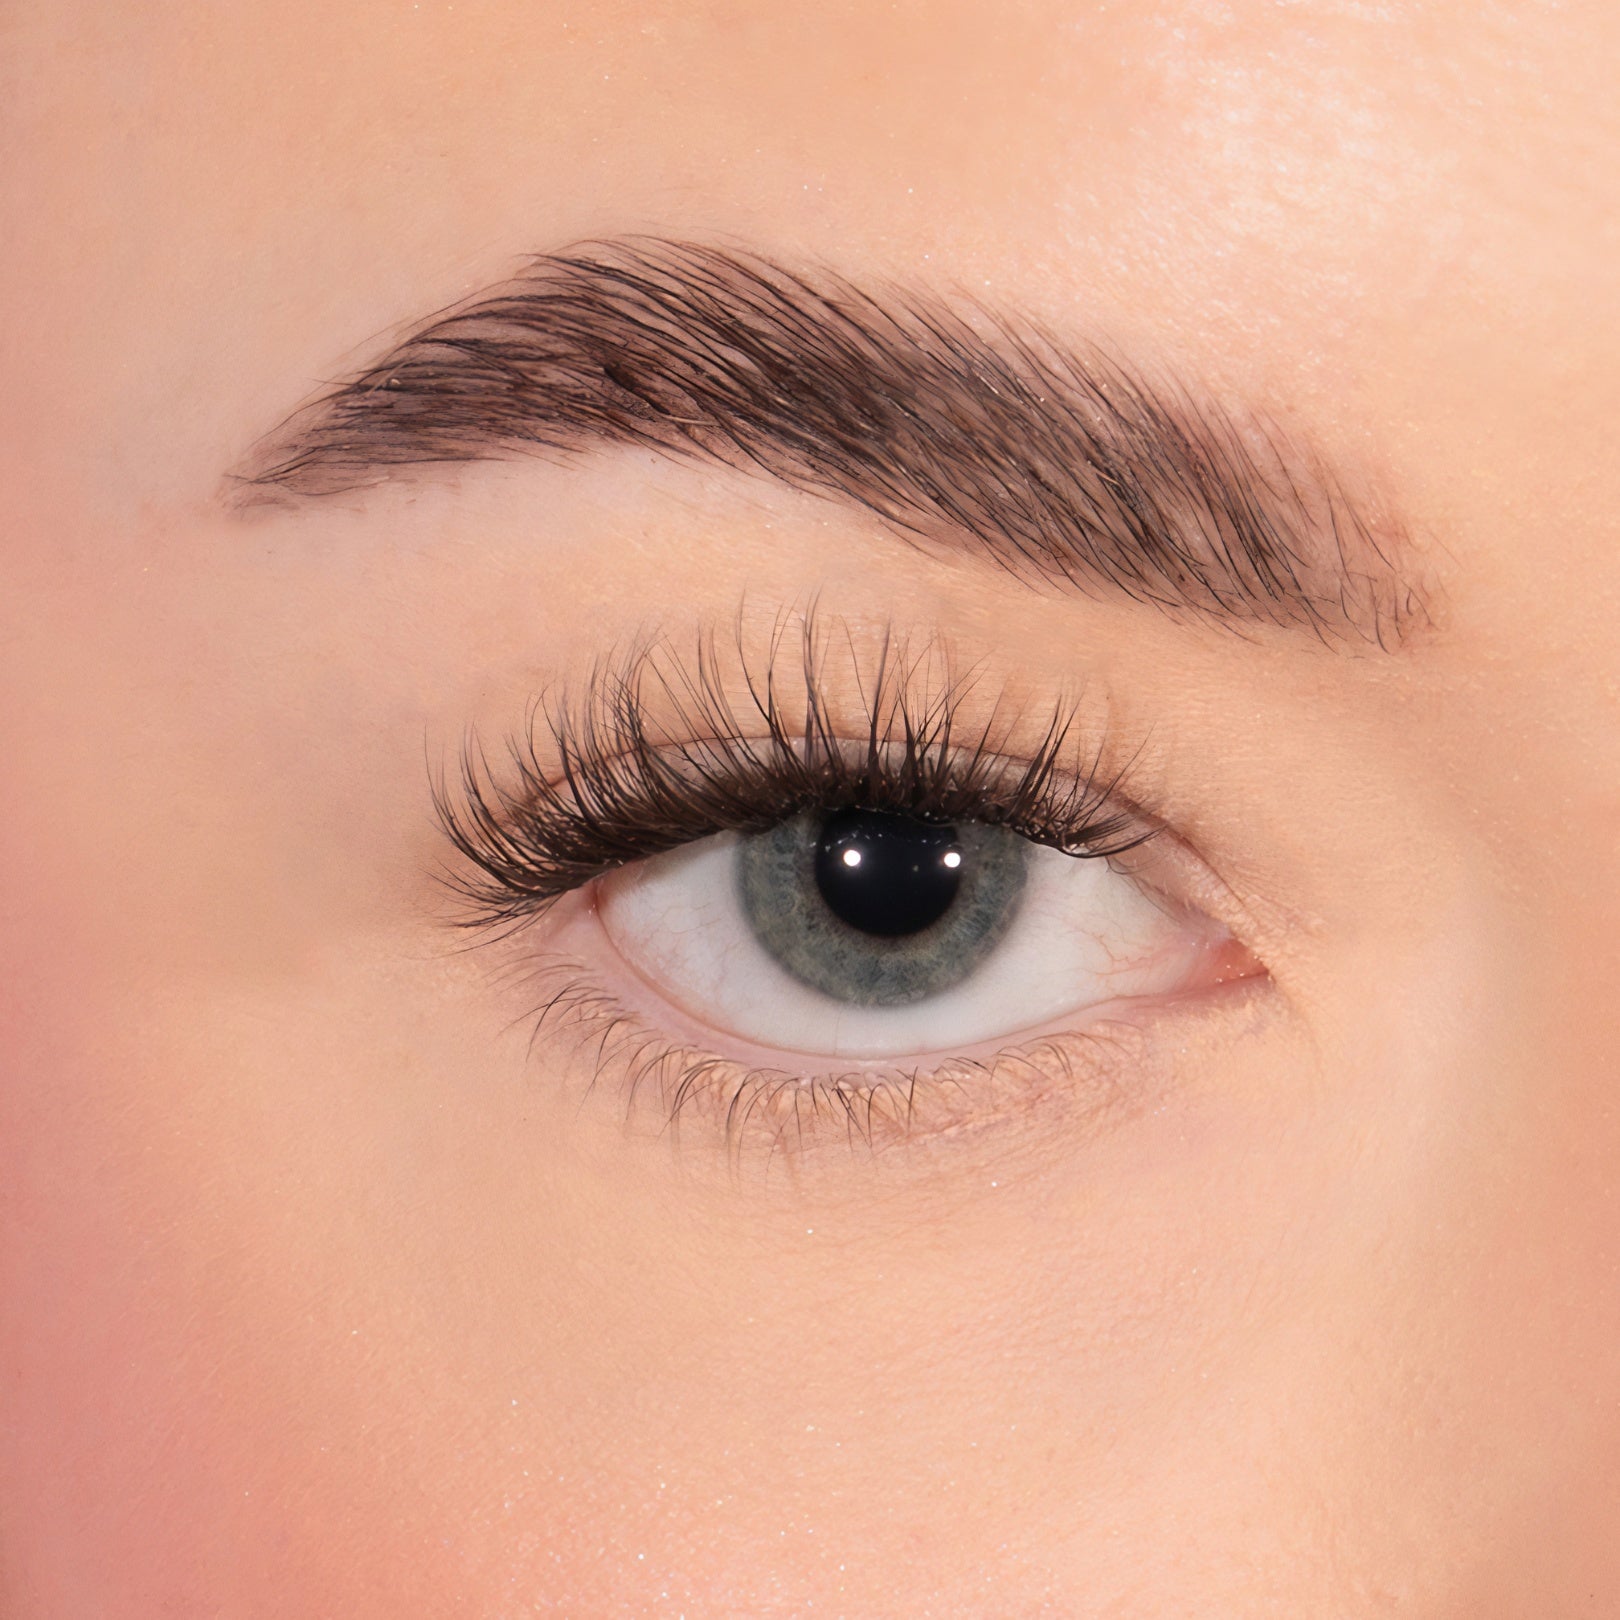 Glam Pre-mapped Press-On Lashes